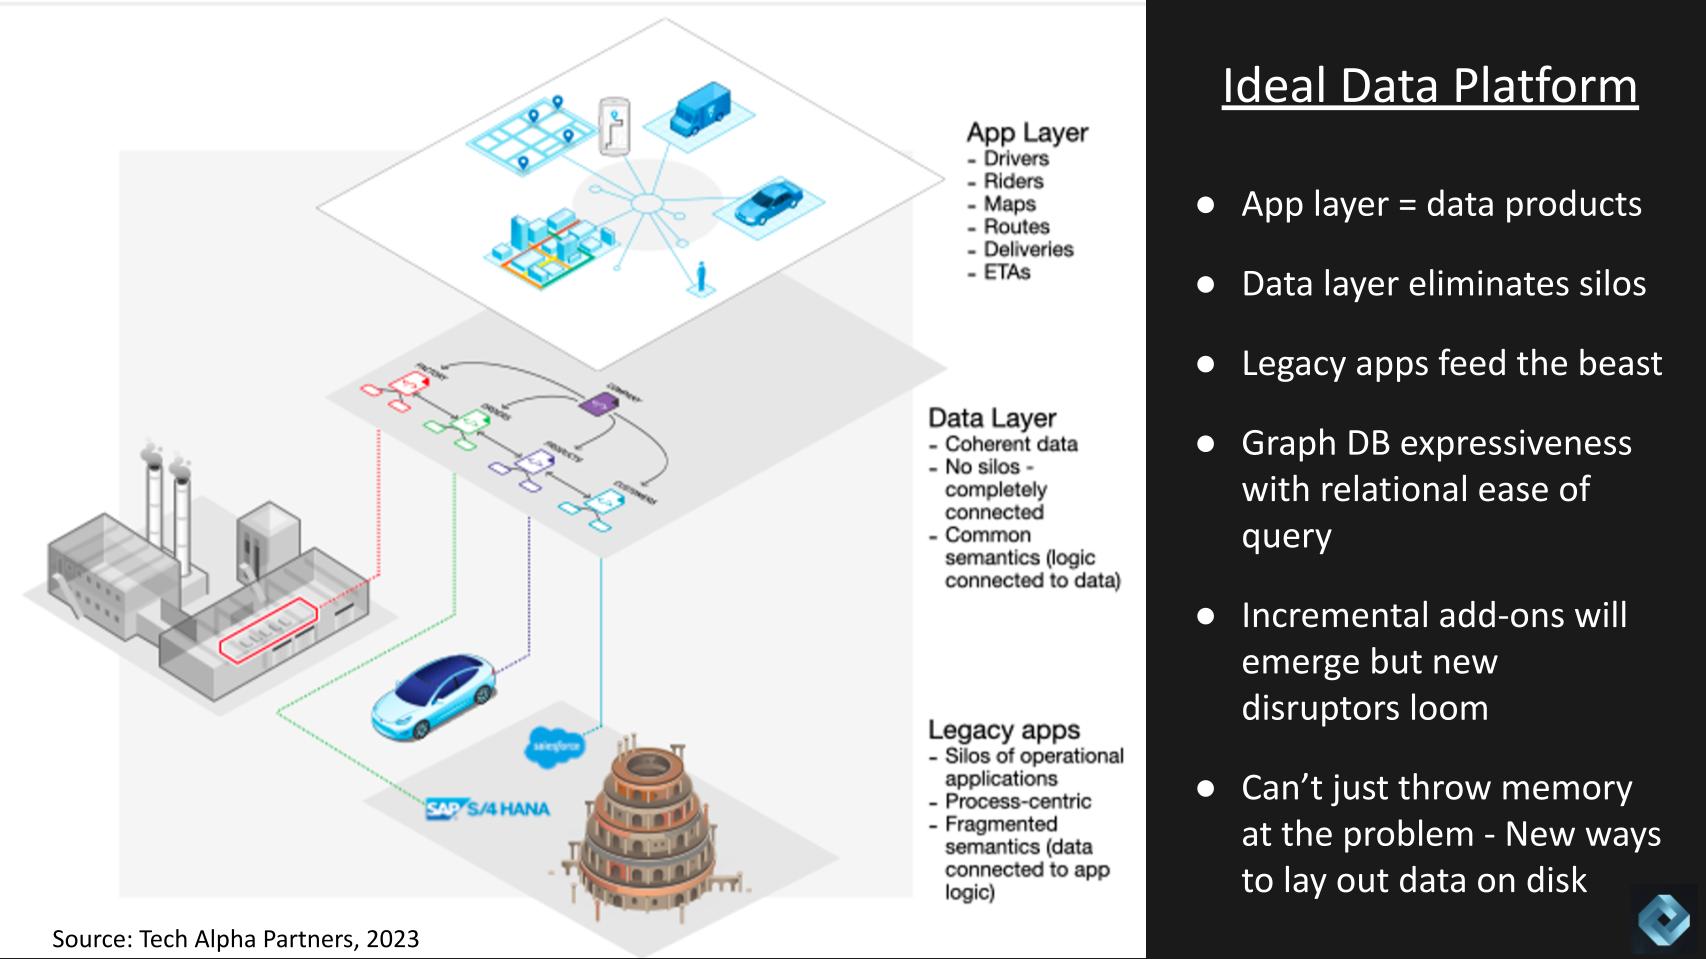 Ideal data platform points showing the app, data, and legacy app layers